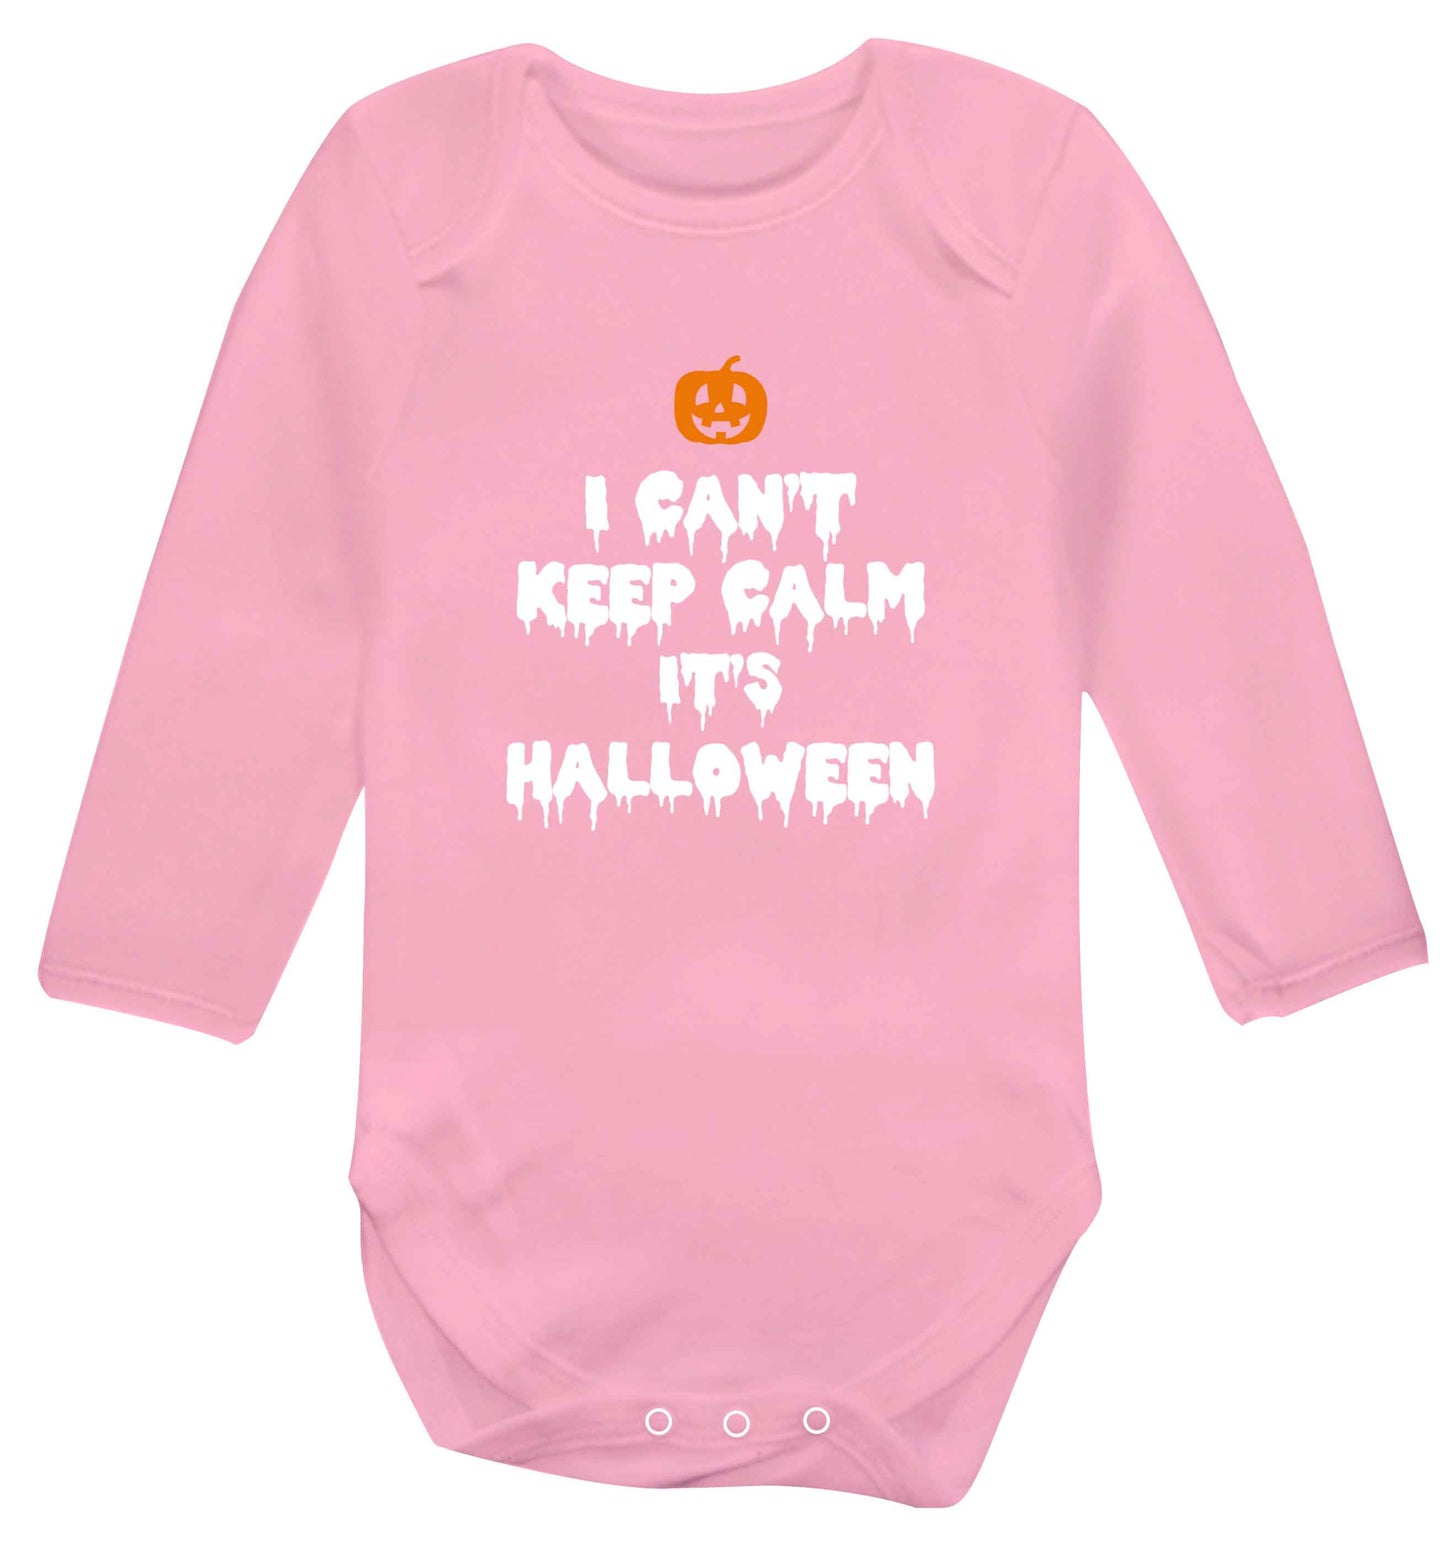 I can't keep calm it's halloween baby vest long sleeved pale pink 6-12 months